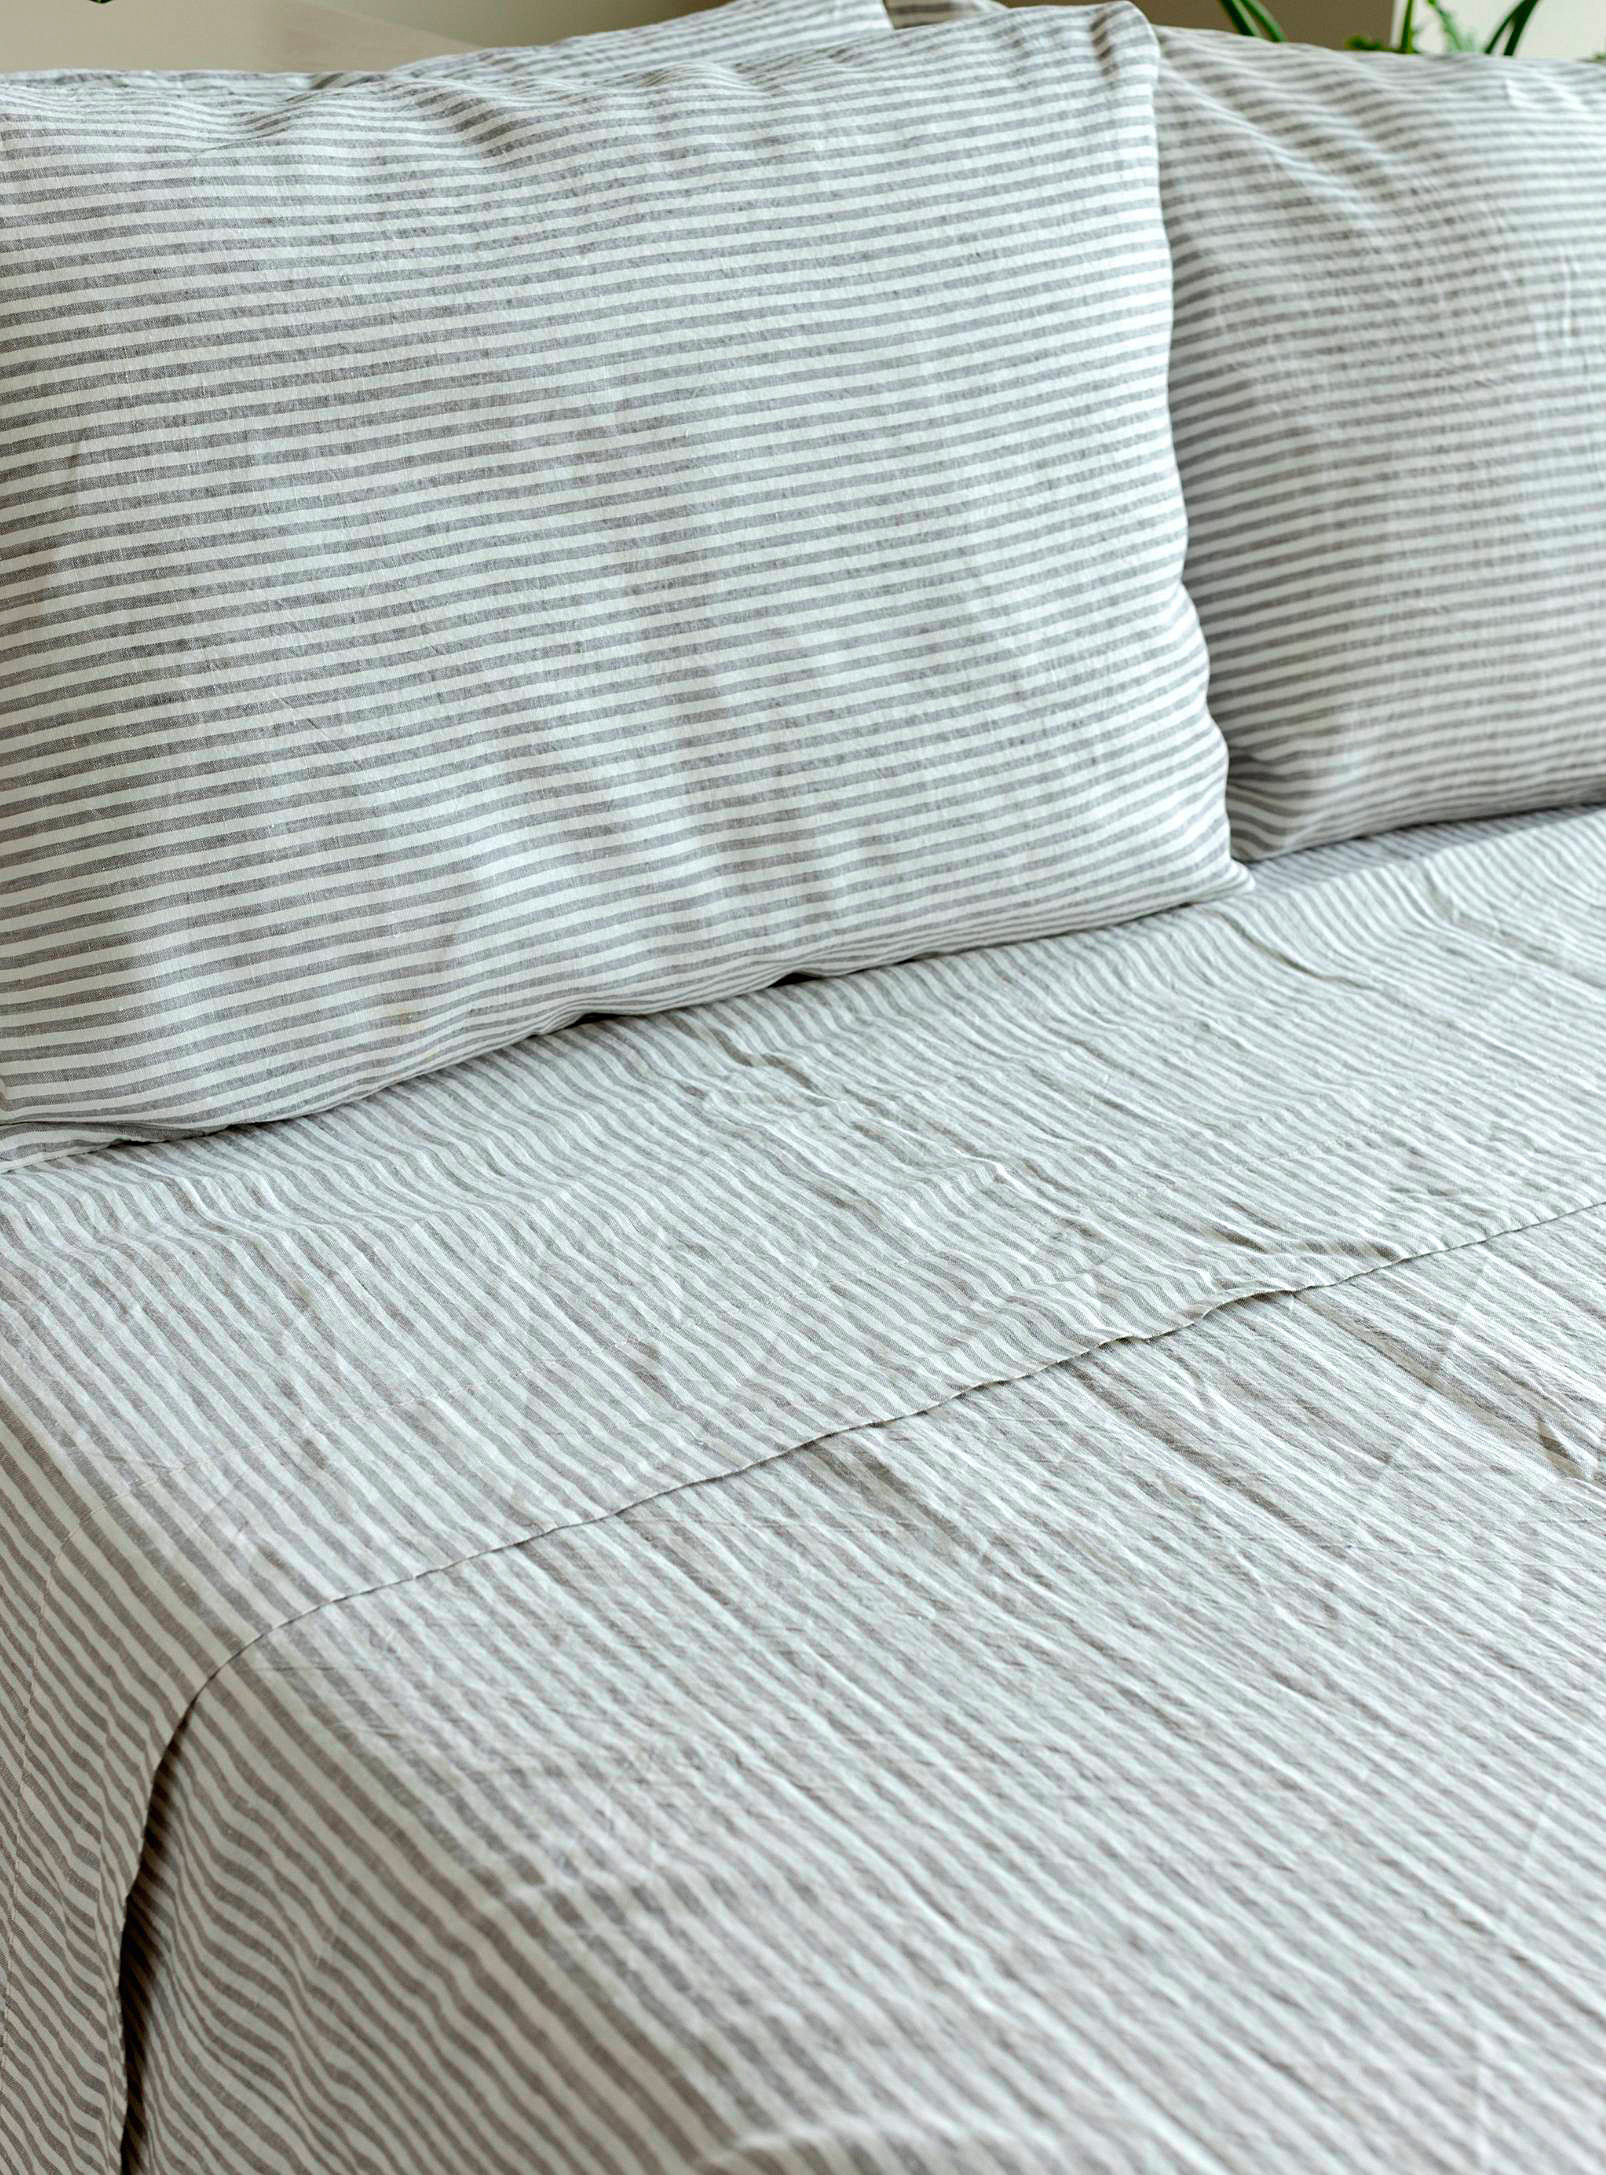 Wilet Striped Pure Pre-washed Linen Bedsheet Set Suitable For A Queen-size Mattress In Patterned Grey